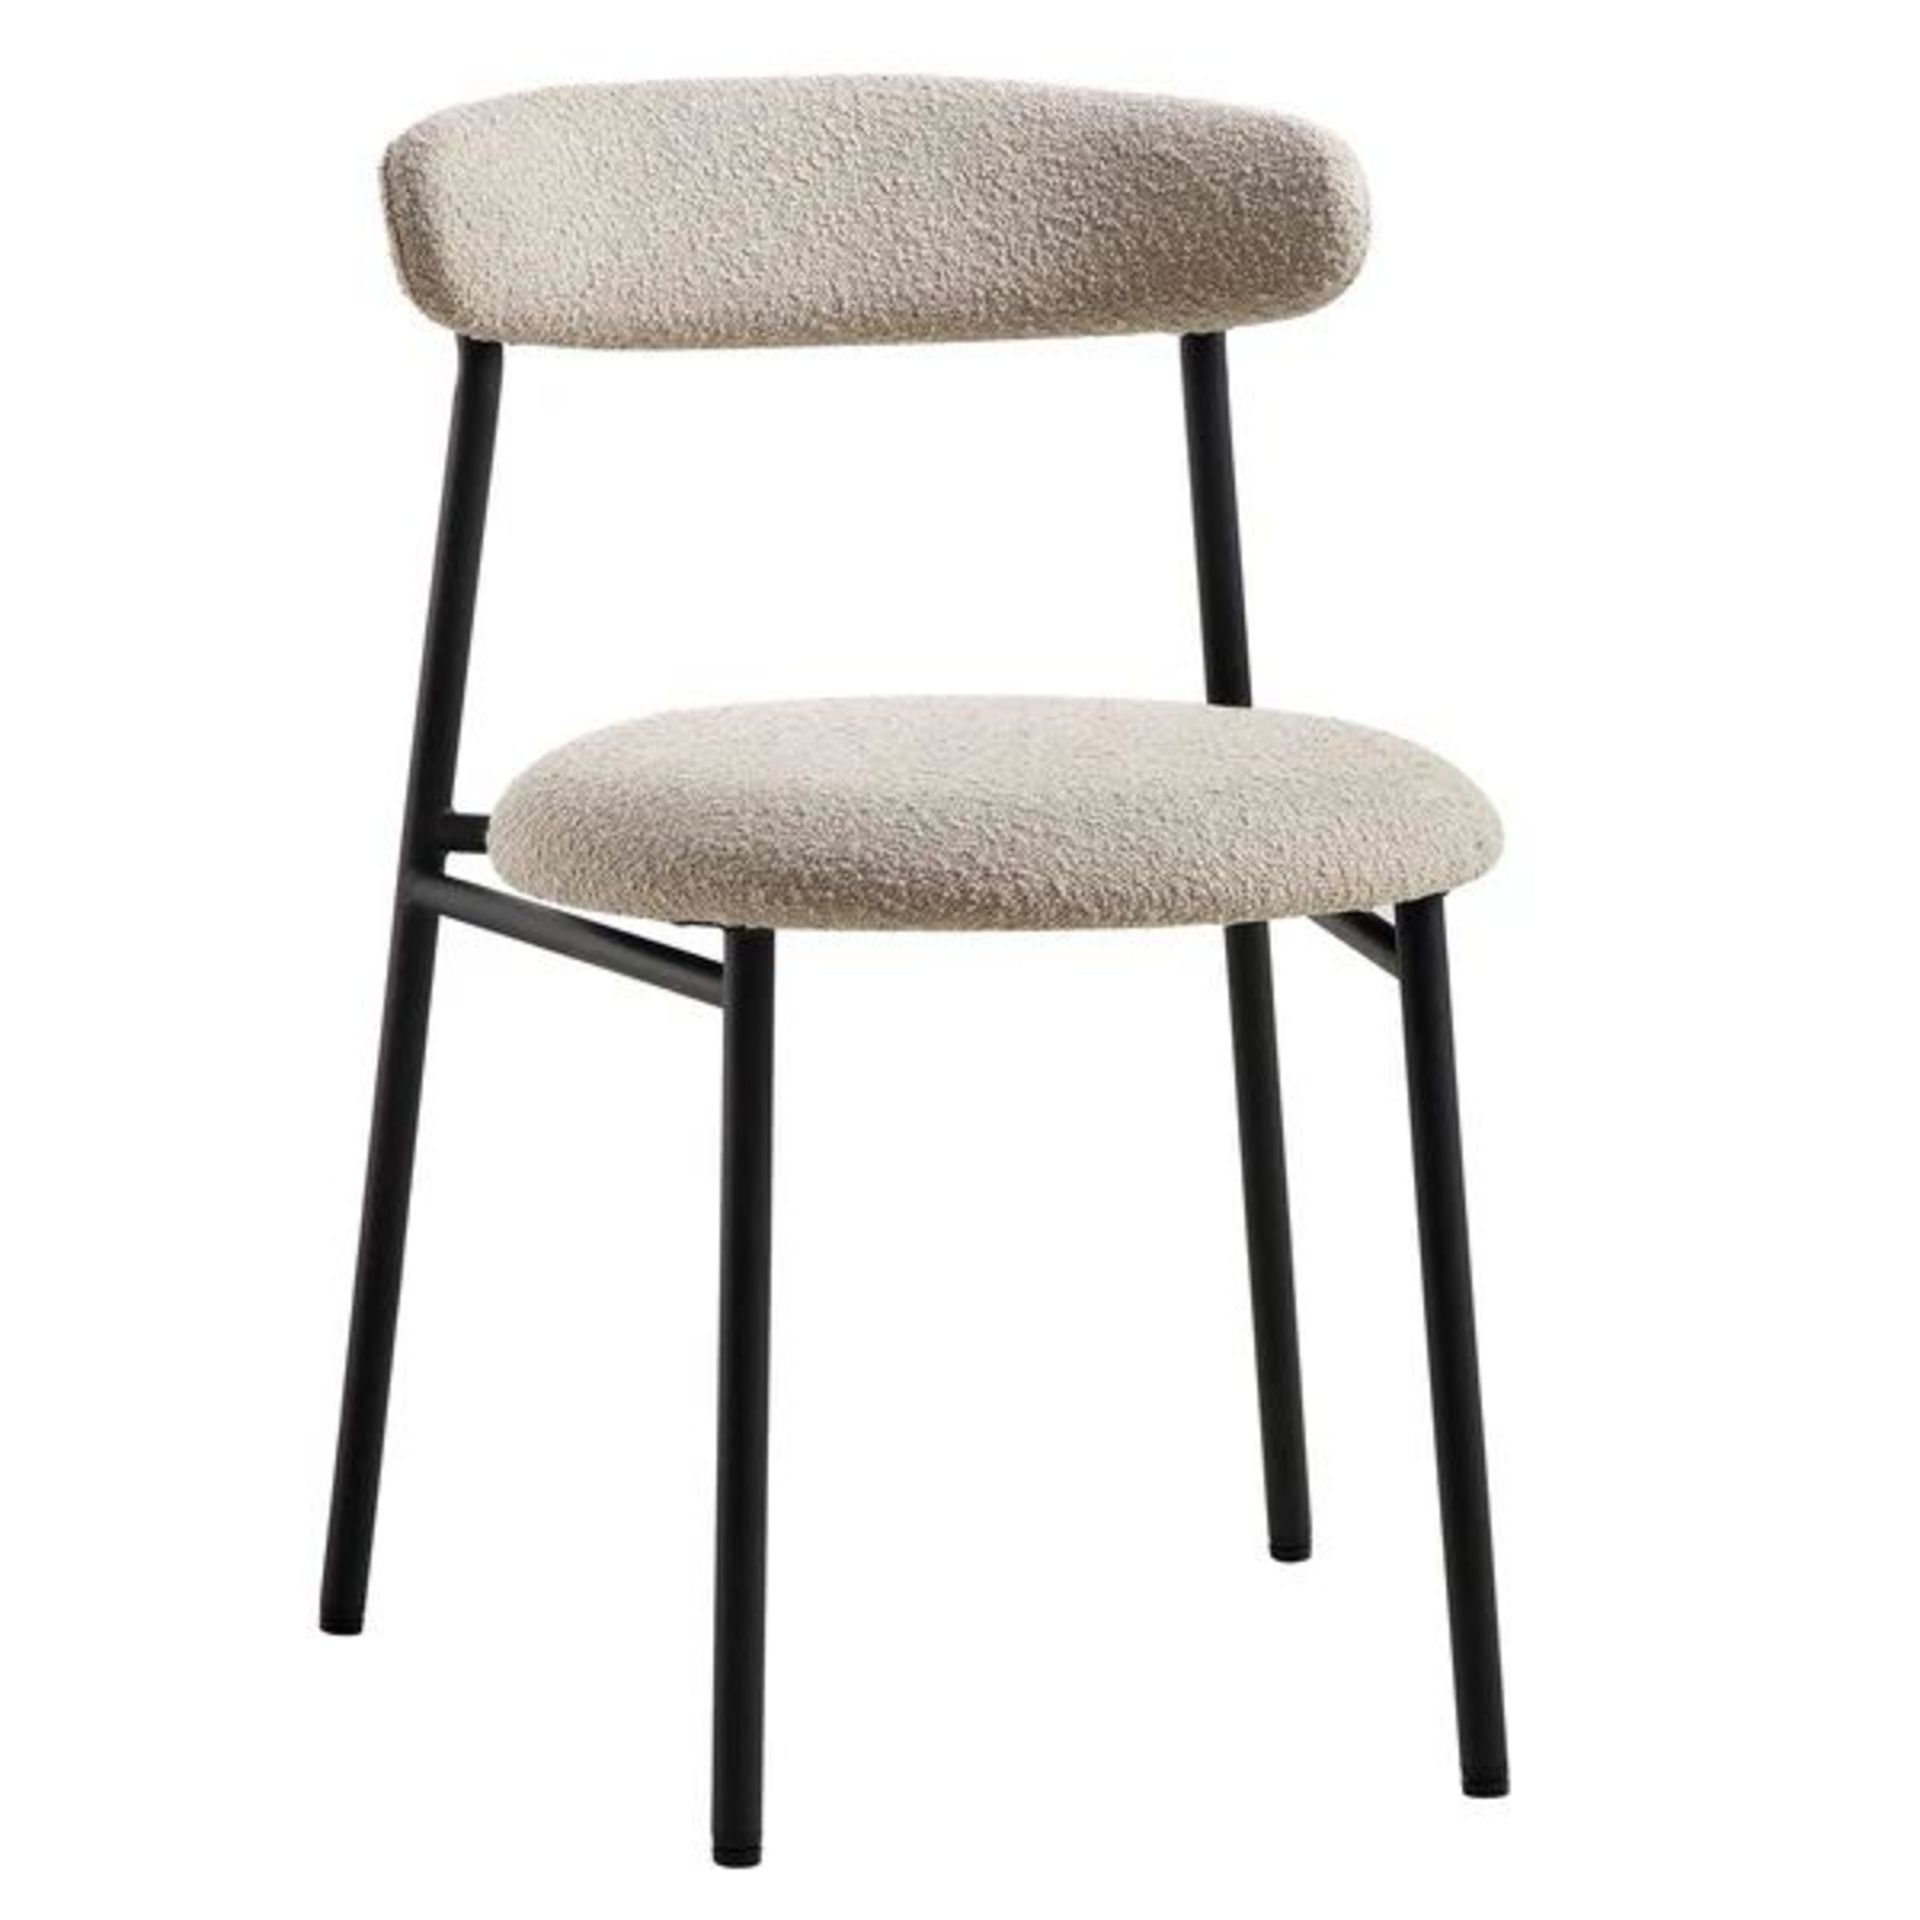 Donna Set of 2 Taupe Boucle Dining Chairs. - SR24. RRP £199.99. The ultra-slim black metal legs - Image 2 of 2